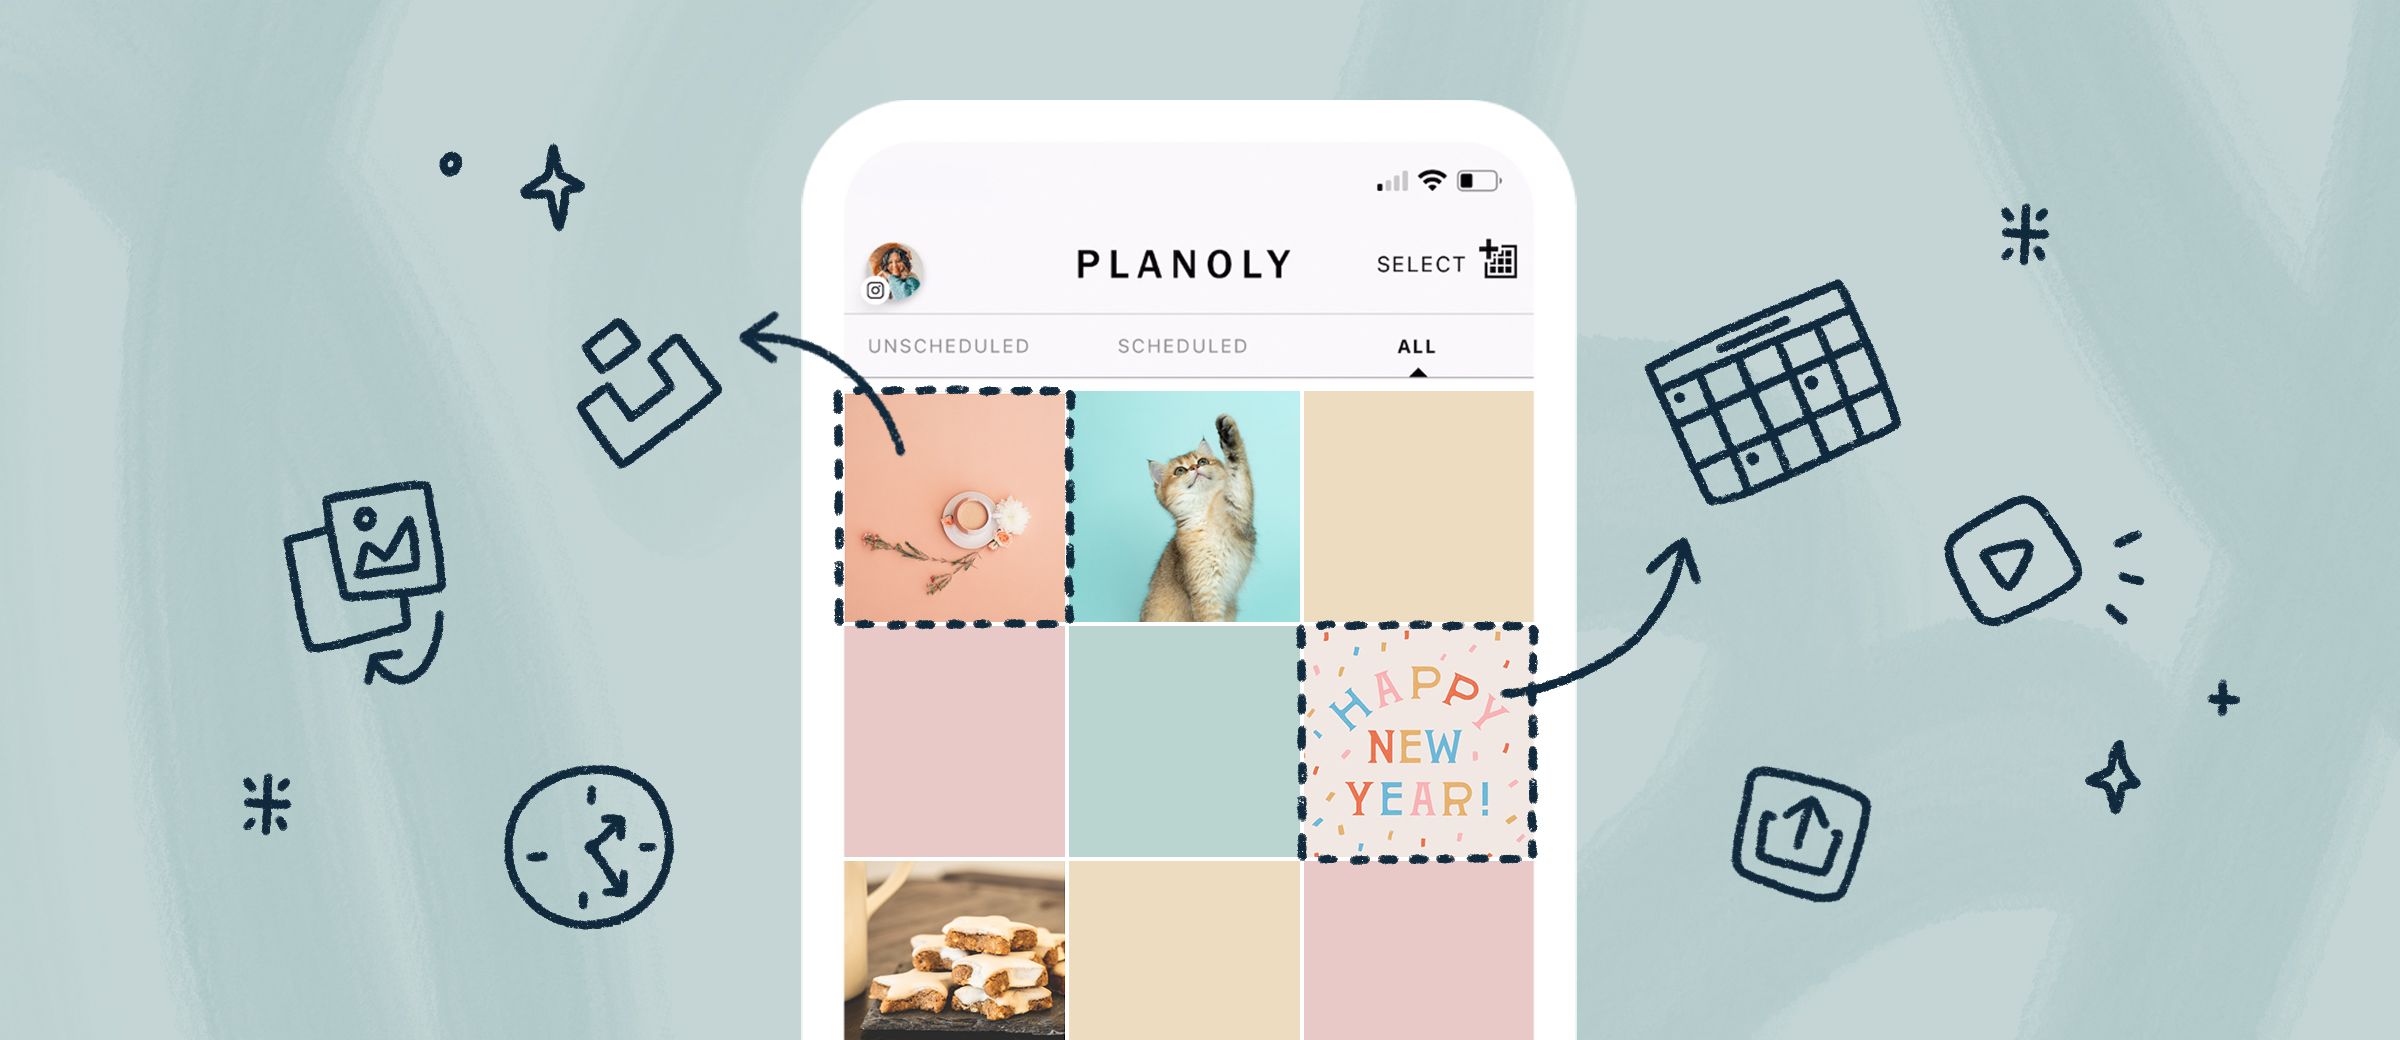 The Benefits of Using a Paid PLANOLY Account, by reilly-purl